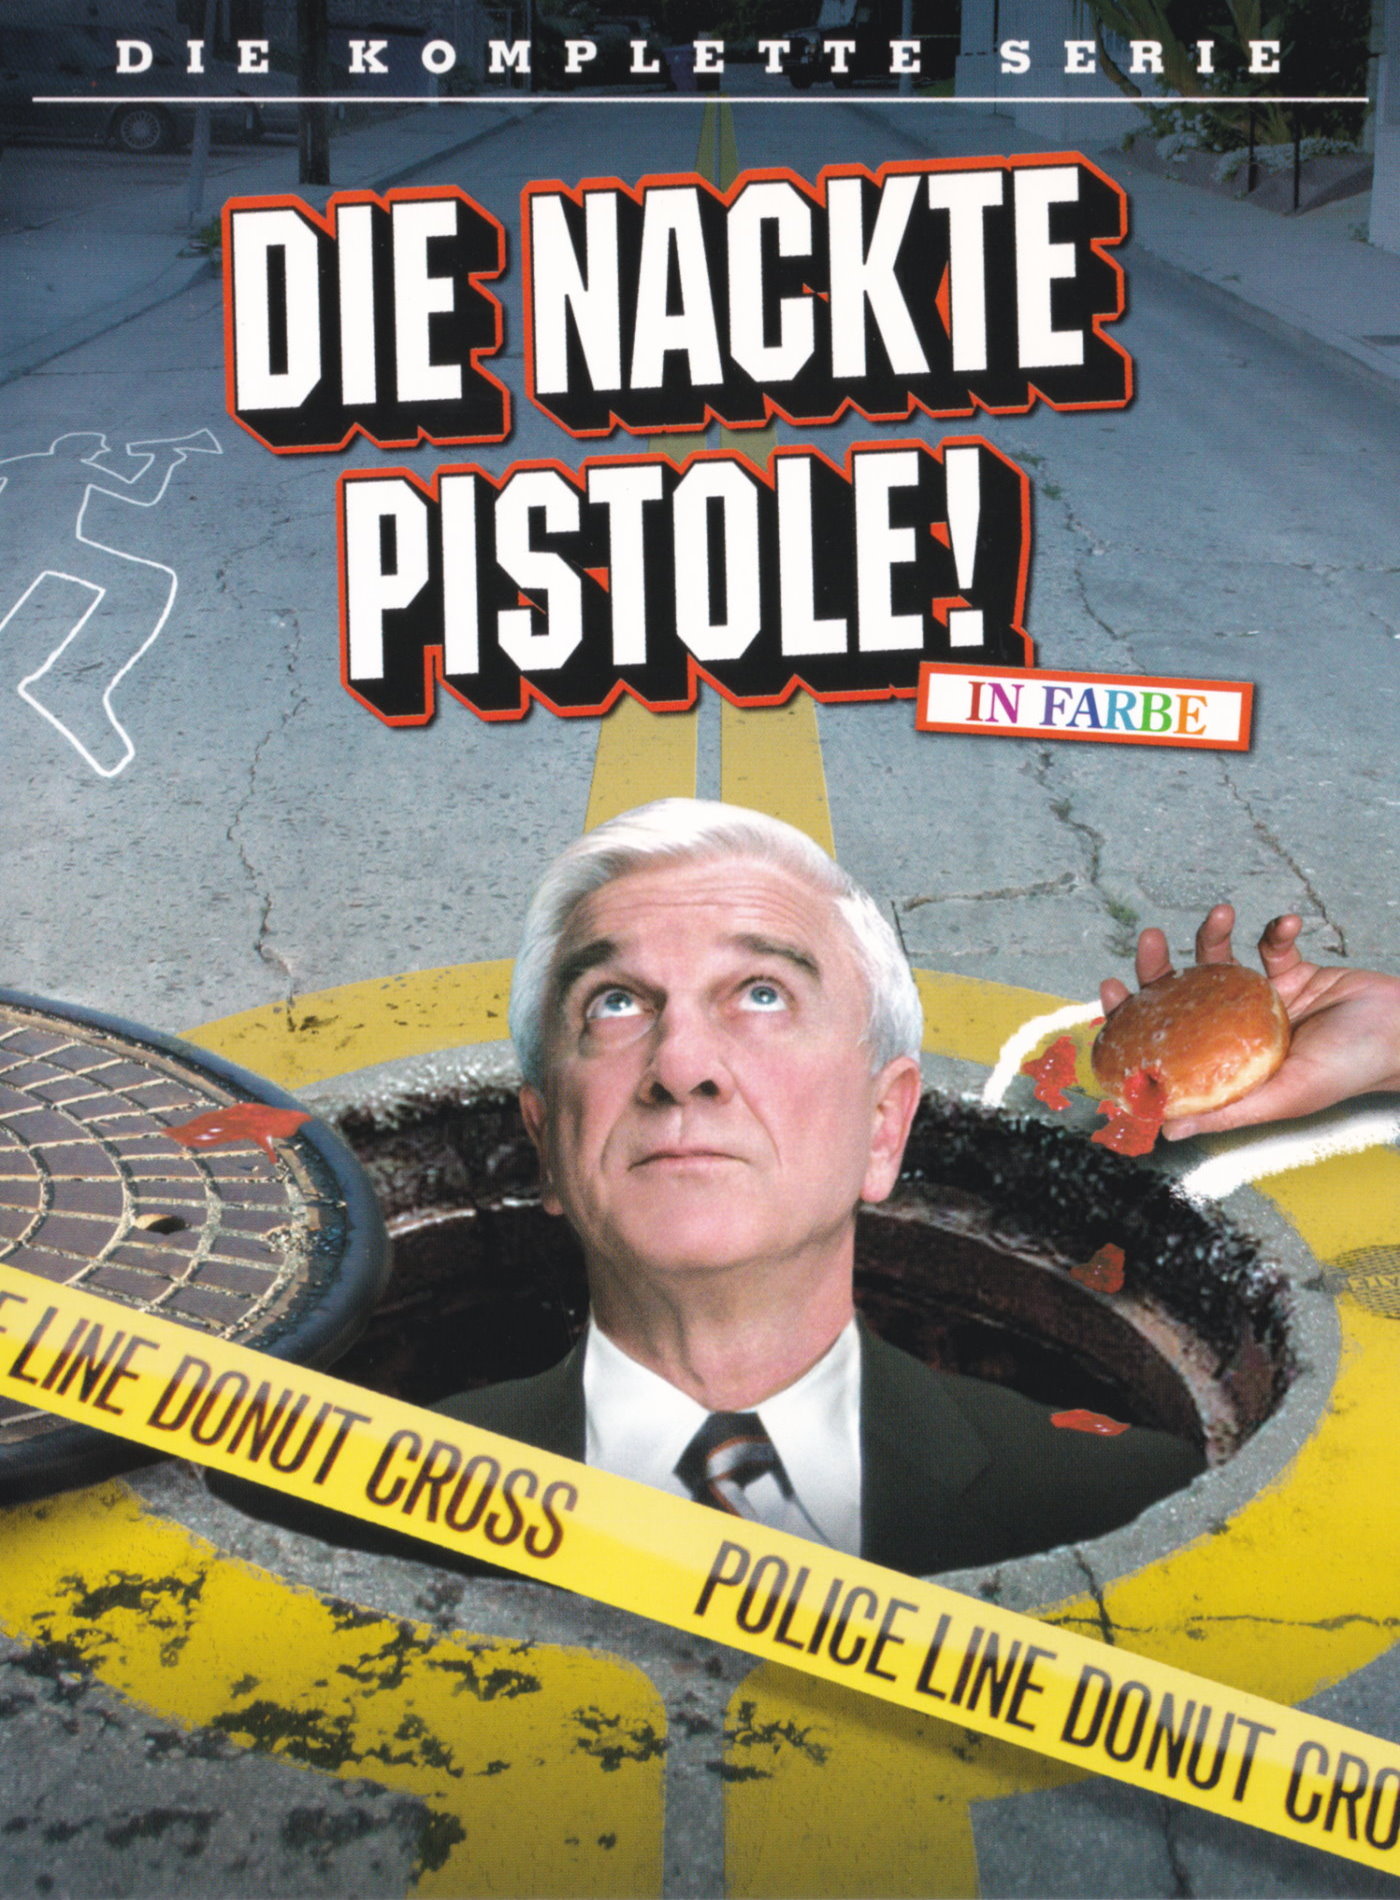 Cover - Die Nackte Pistole - Police Squad.jpg